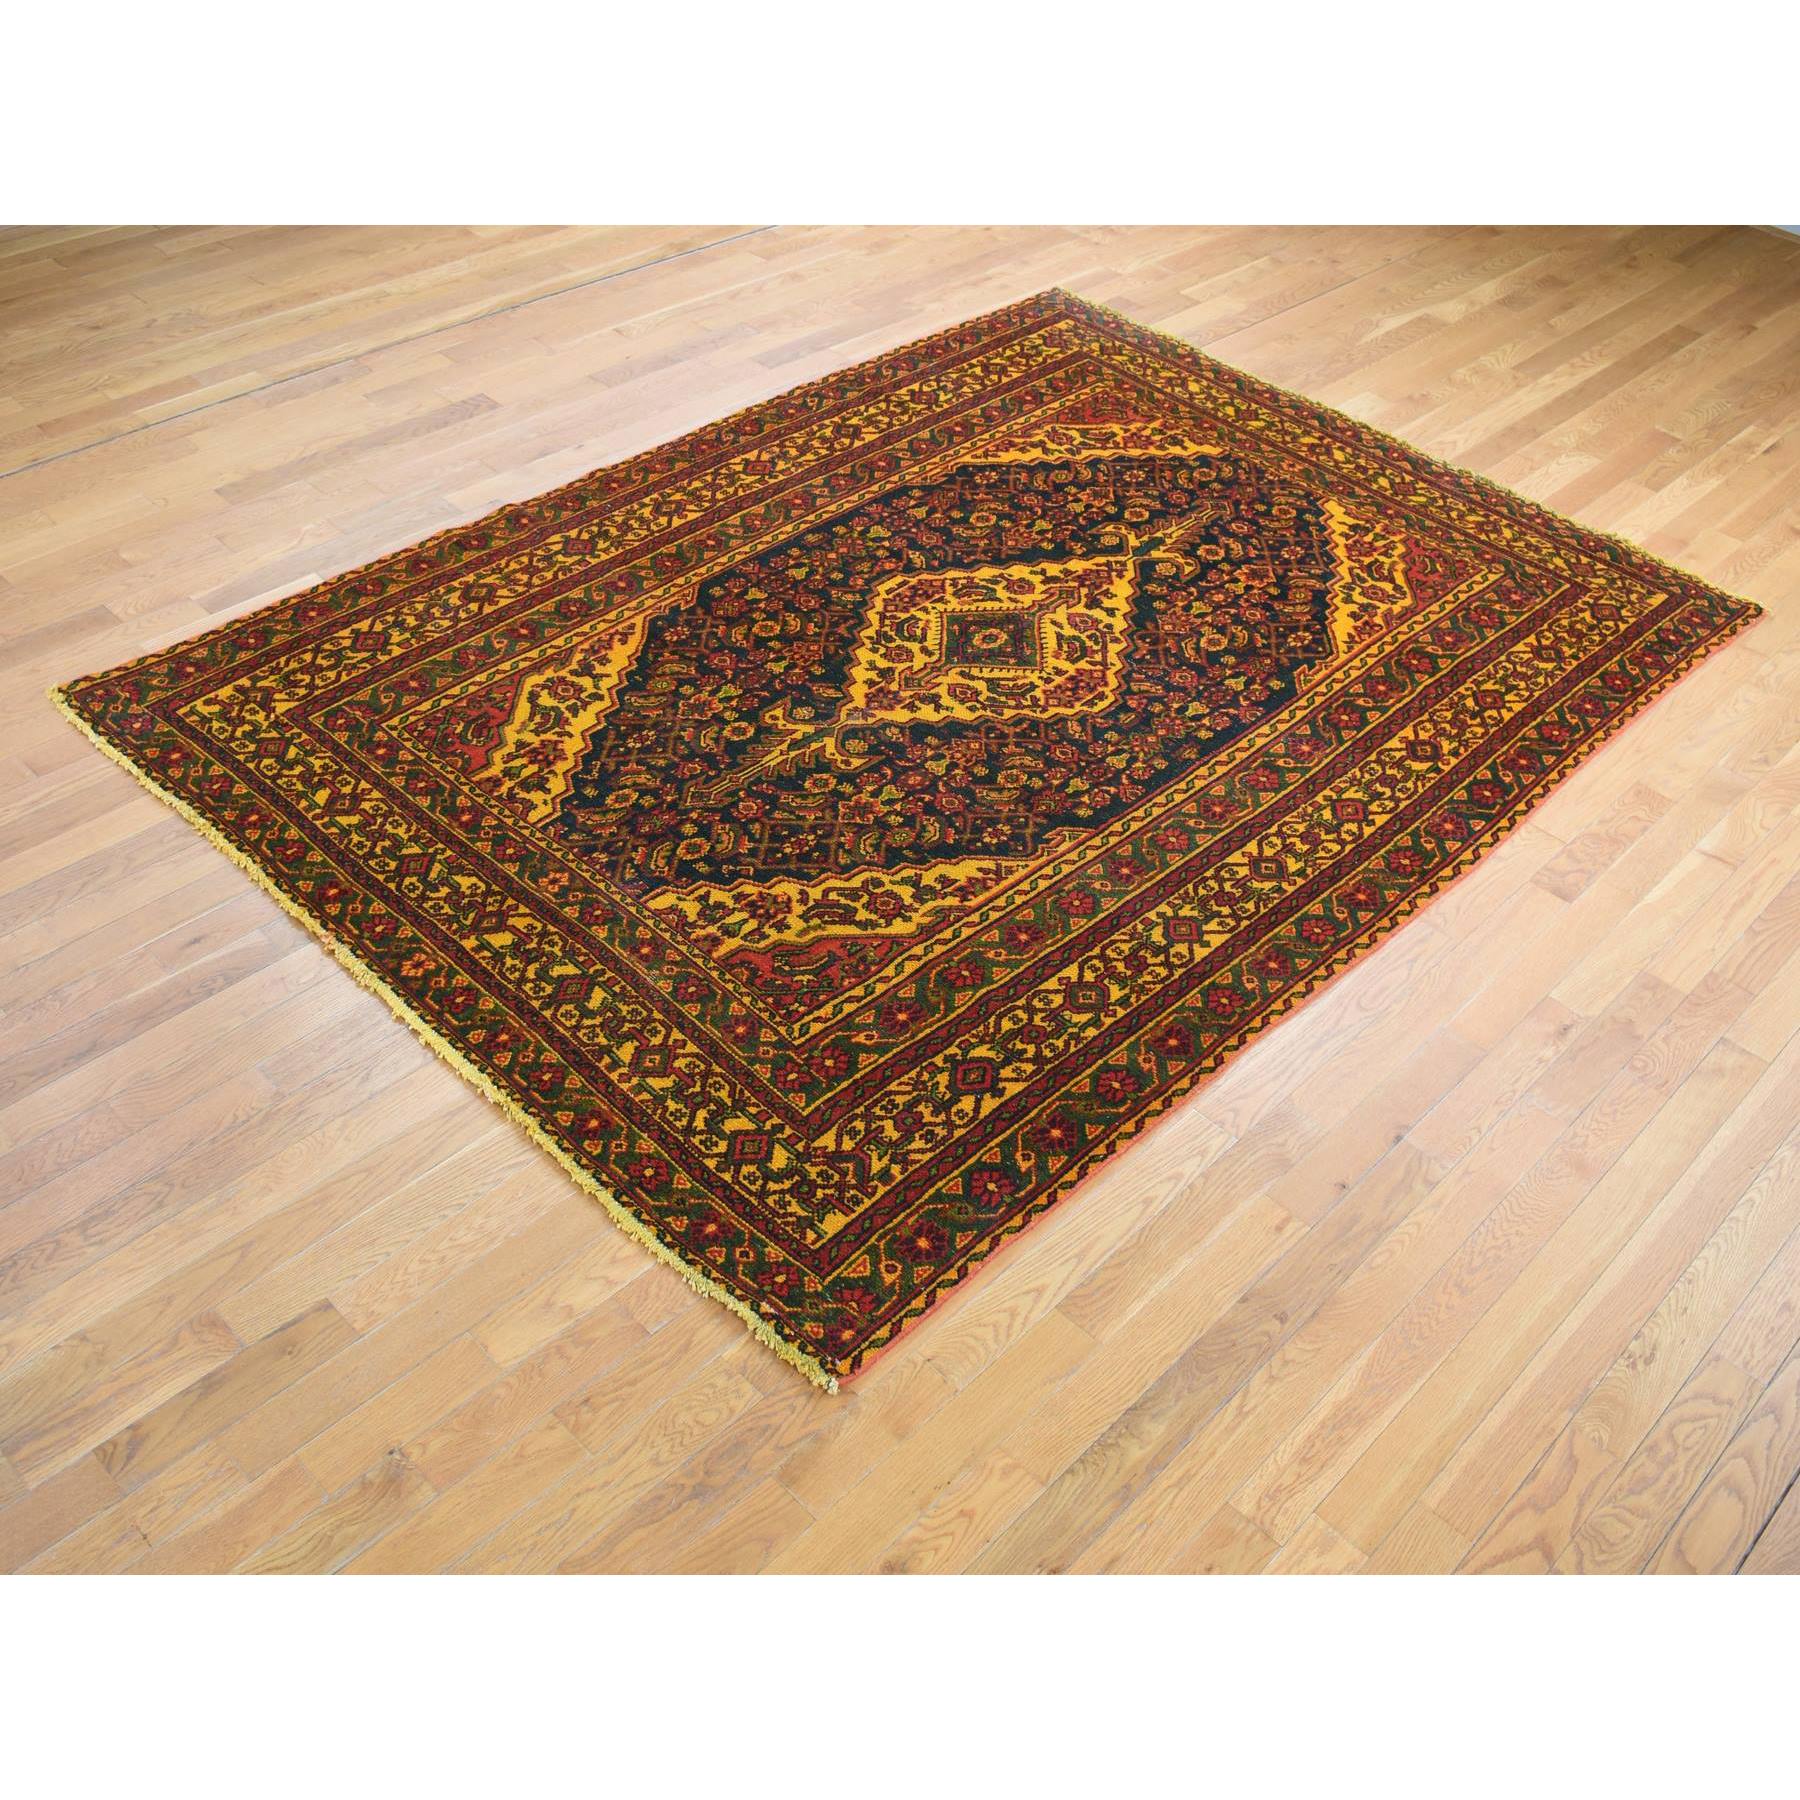  Wool Hand-Knotted Area Rug 6'8